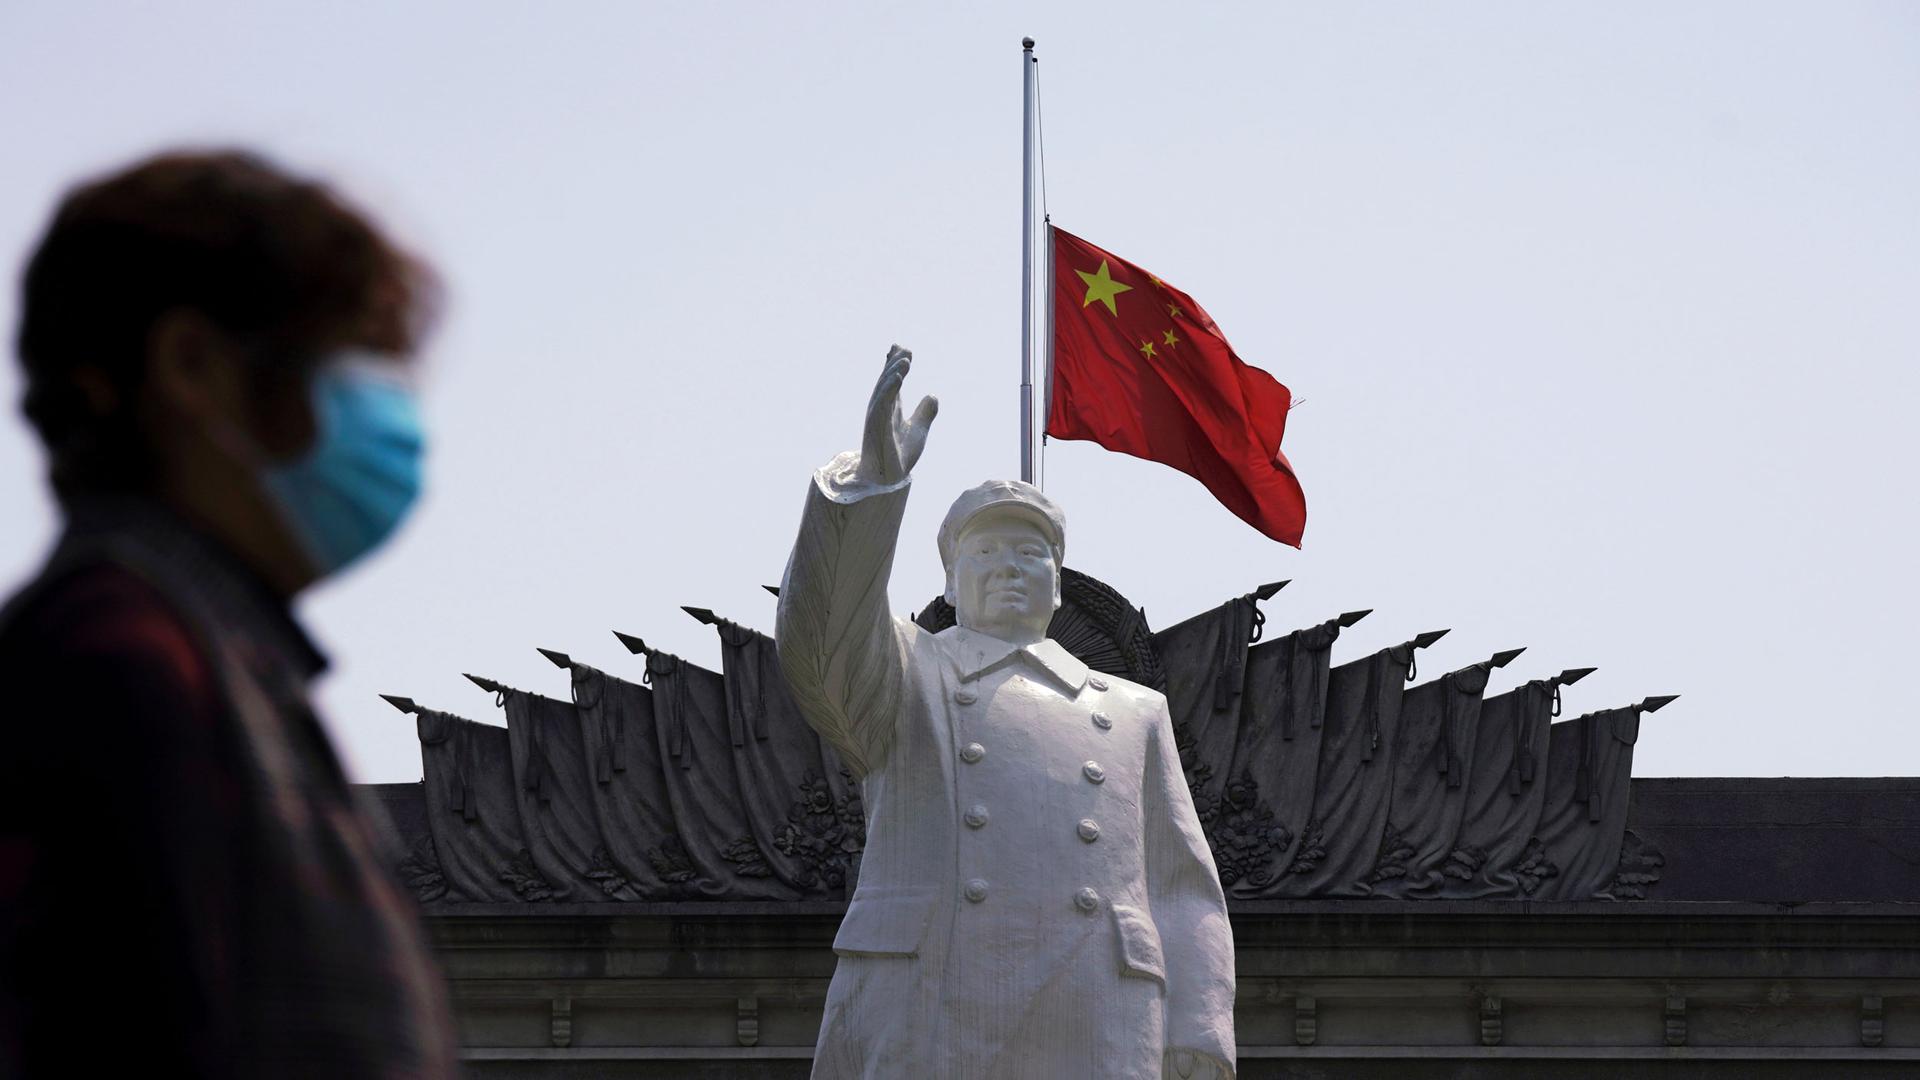 A person wearing a protective face mask is shown in soft focus walking past a statue of late Chinese chairman Mao Zedong with the red Chinese flag flying.